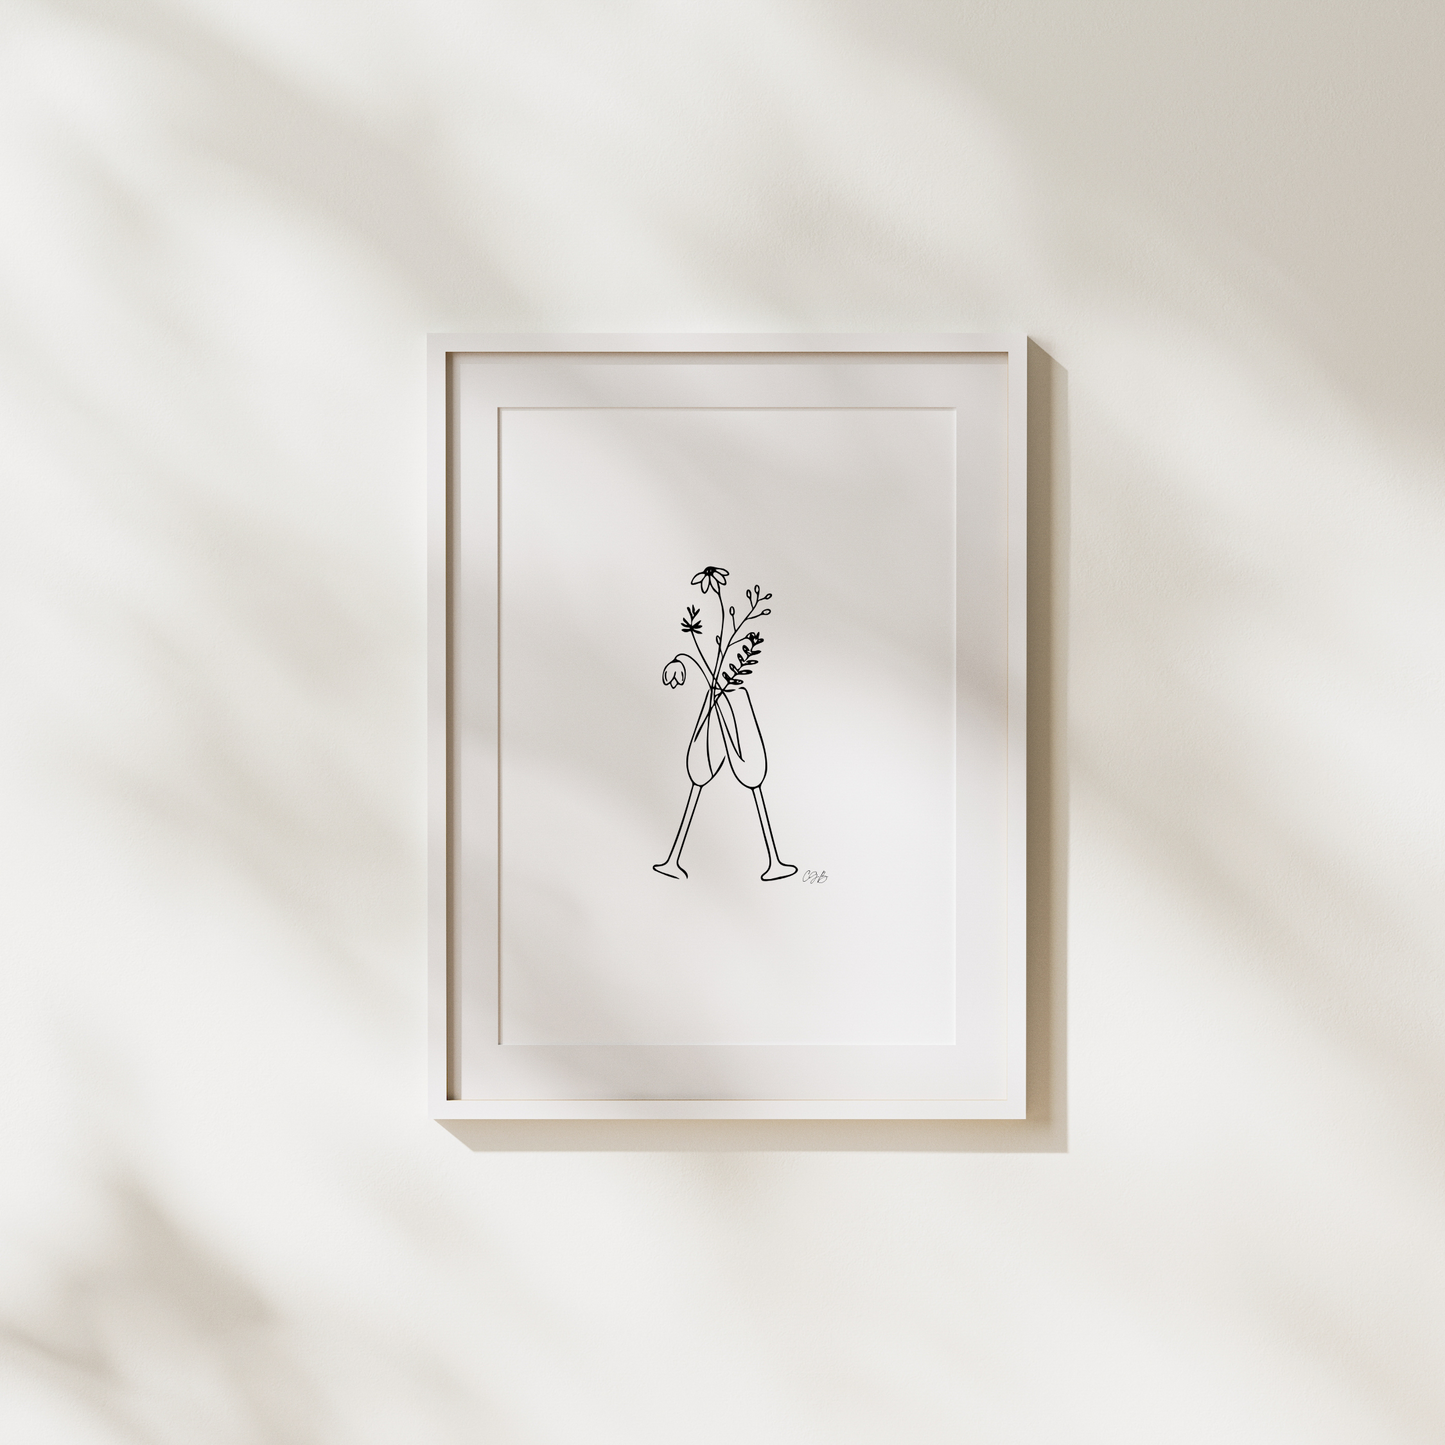 Champagne Flutes | Minimalistic Artwork | A4 Wall Art | Countryside Living Decor - The Cotswold Illustrated Company